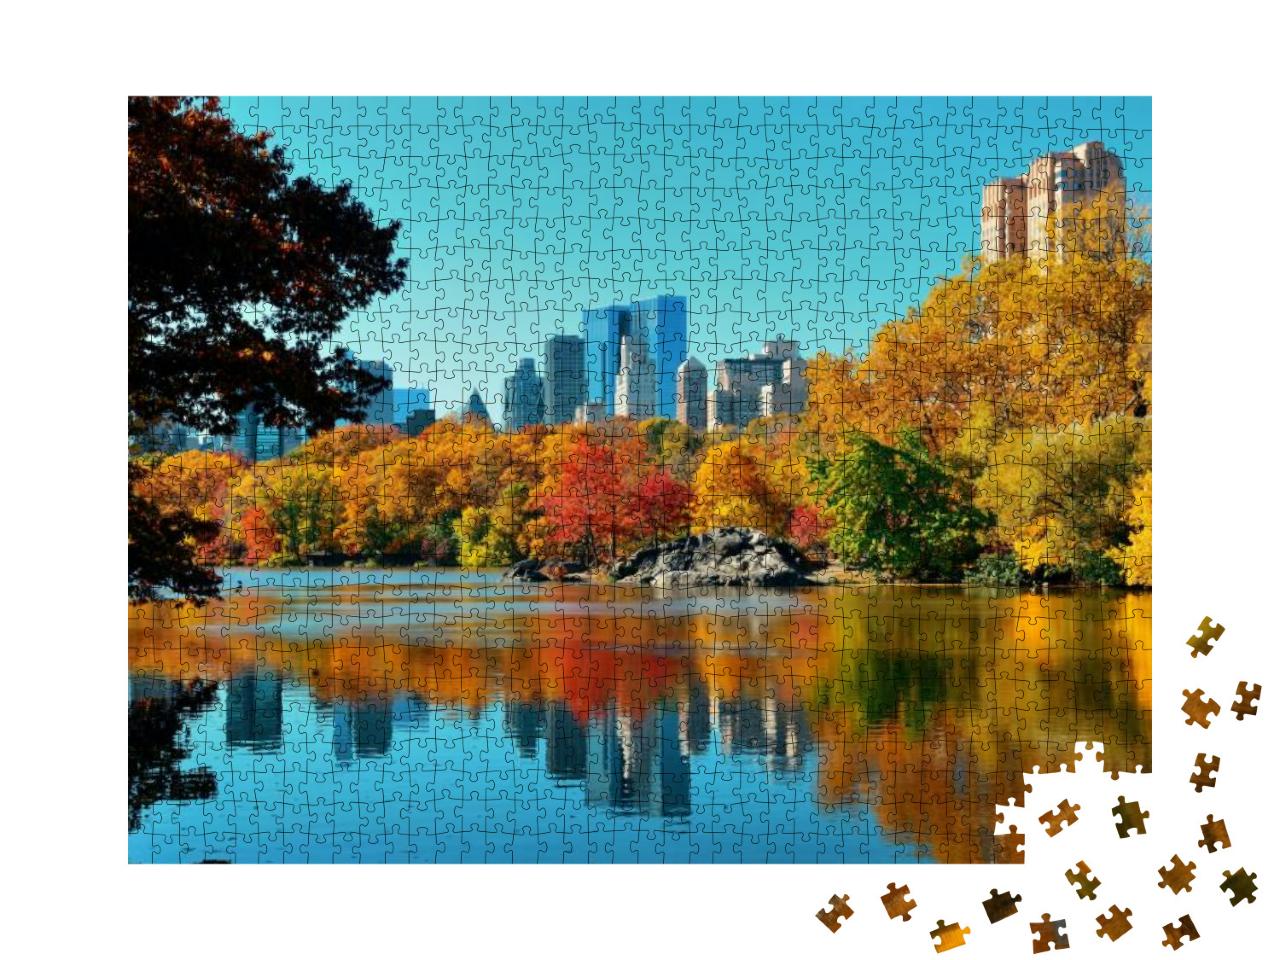 Central Park Autumn & Buildings Reflection in Midtown Man... Jigsaw Puzzle with 1000 pieces